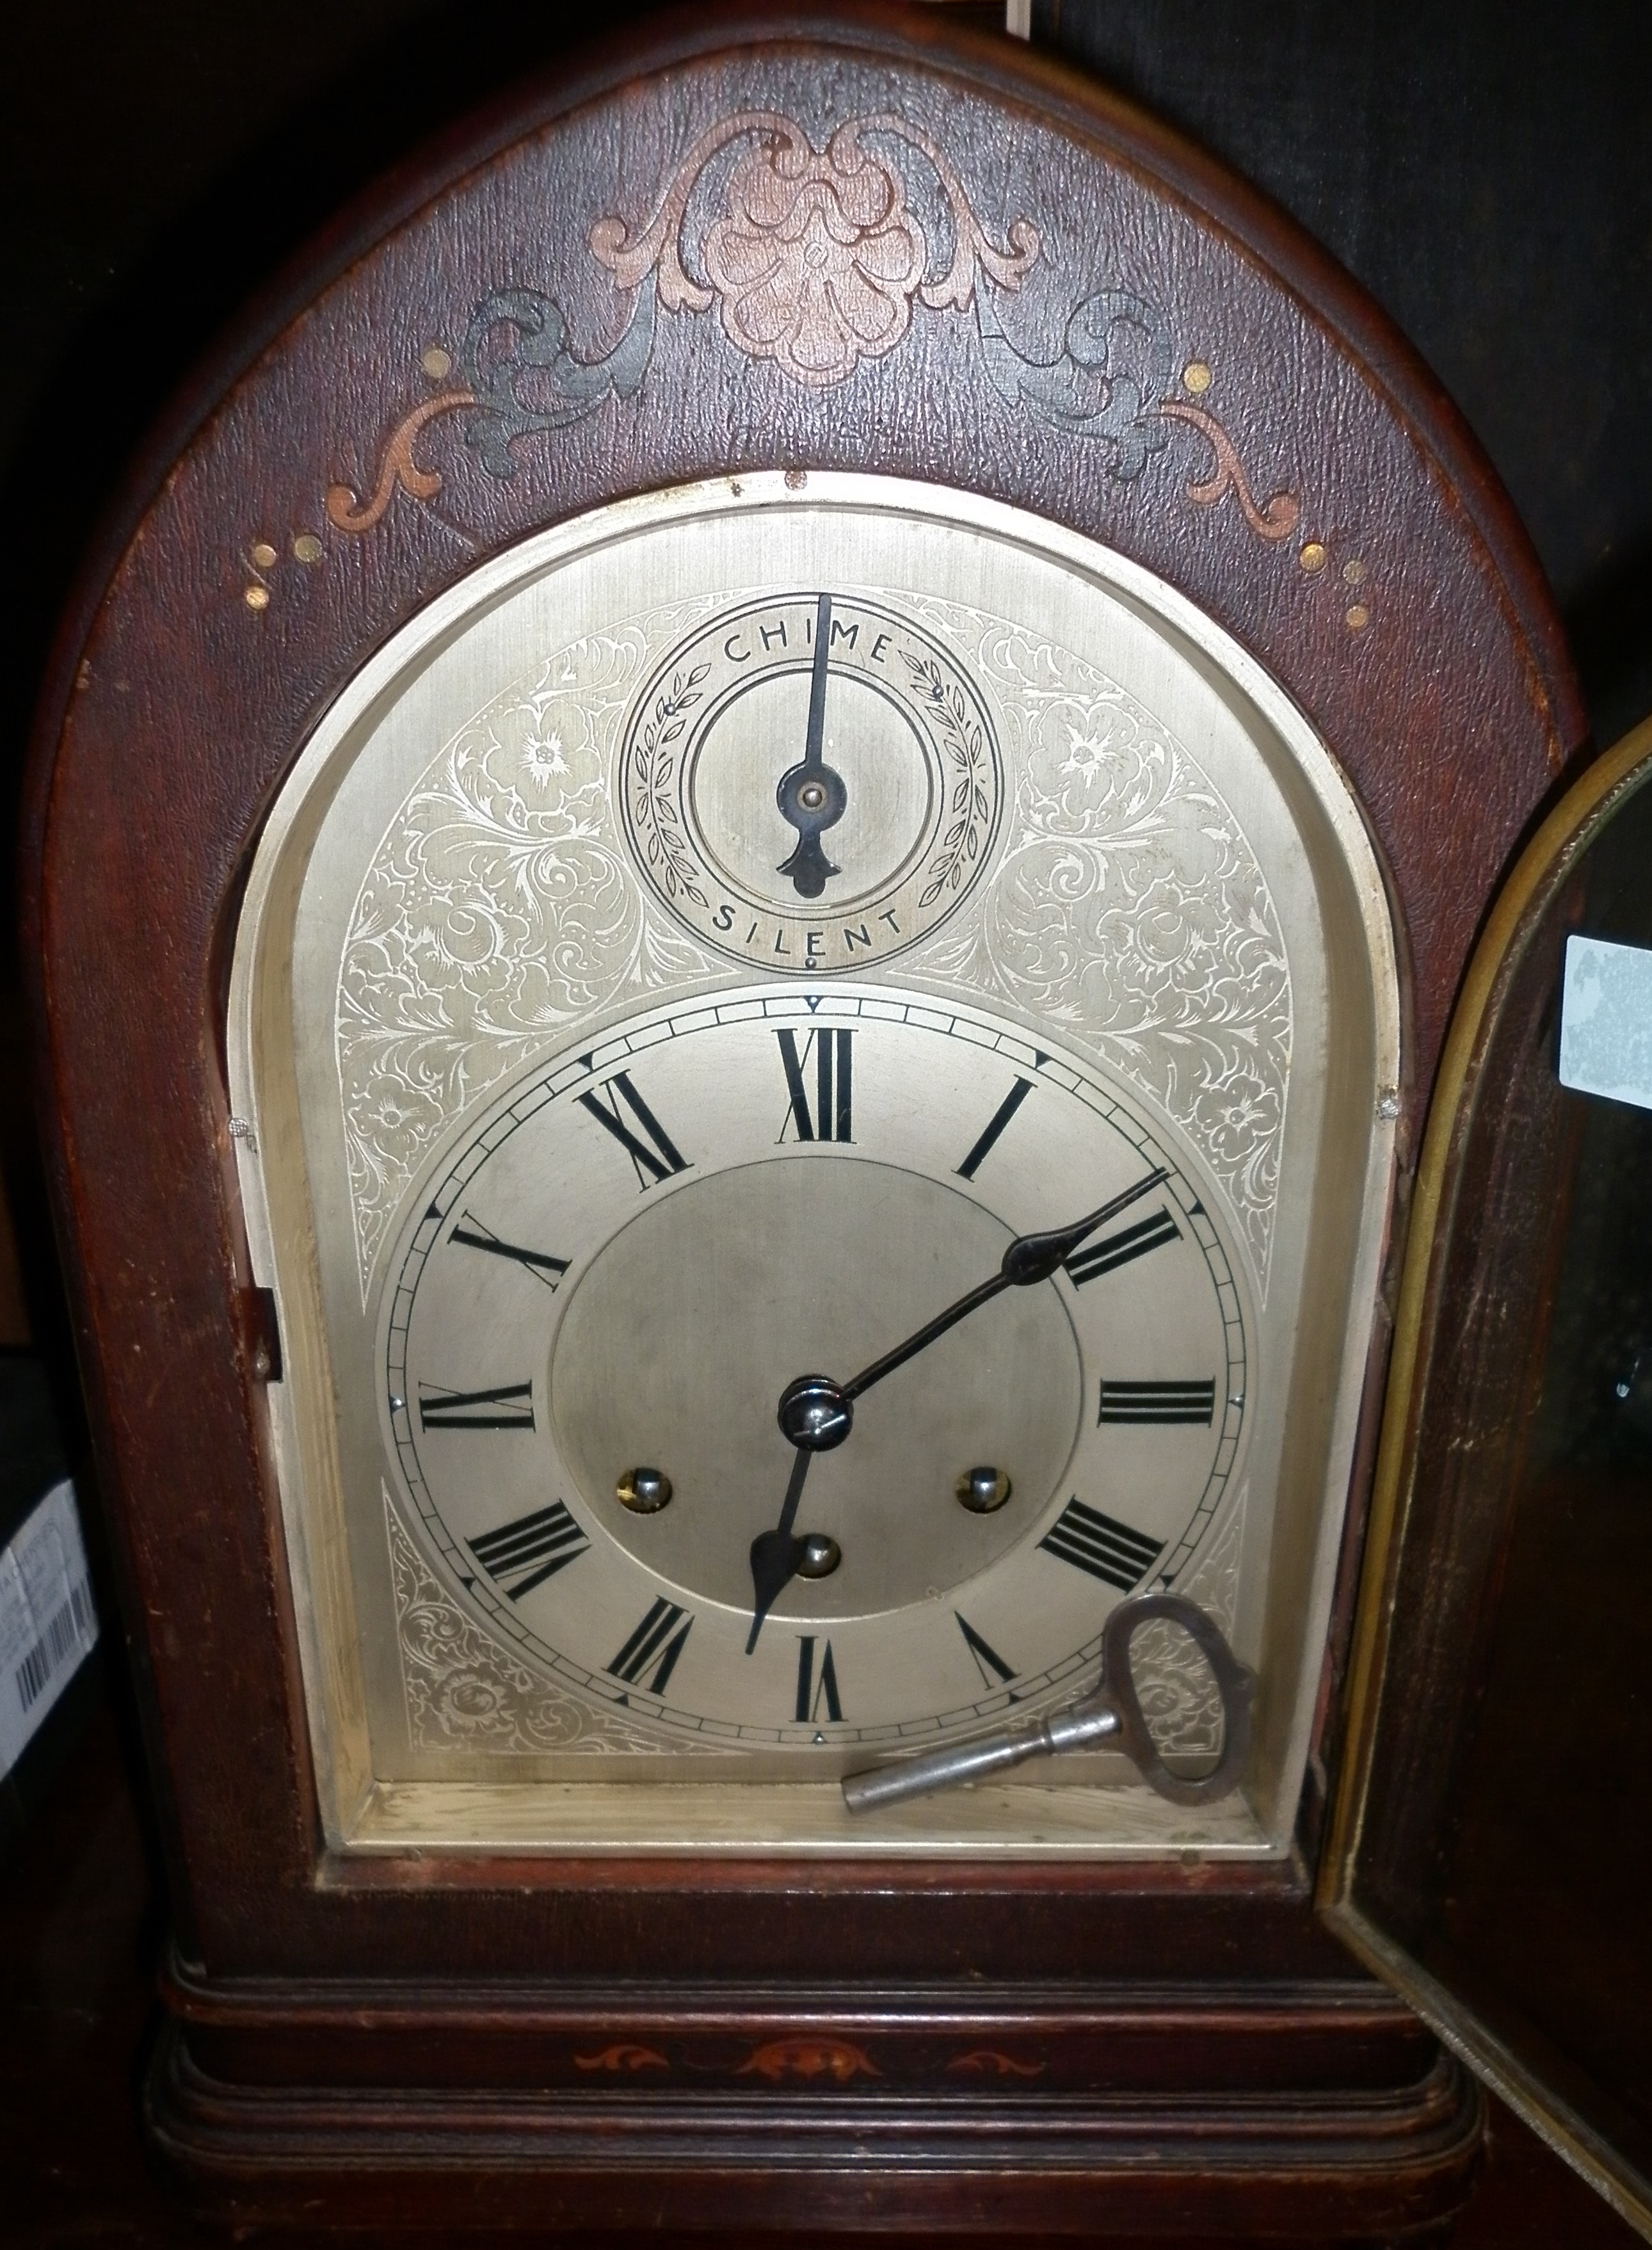 Edwardian inlaid mahogany arch-topped bracket-type mantle clock with chining 8-day German movement - Image 2 of 2